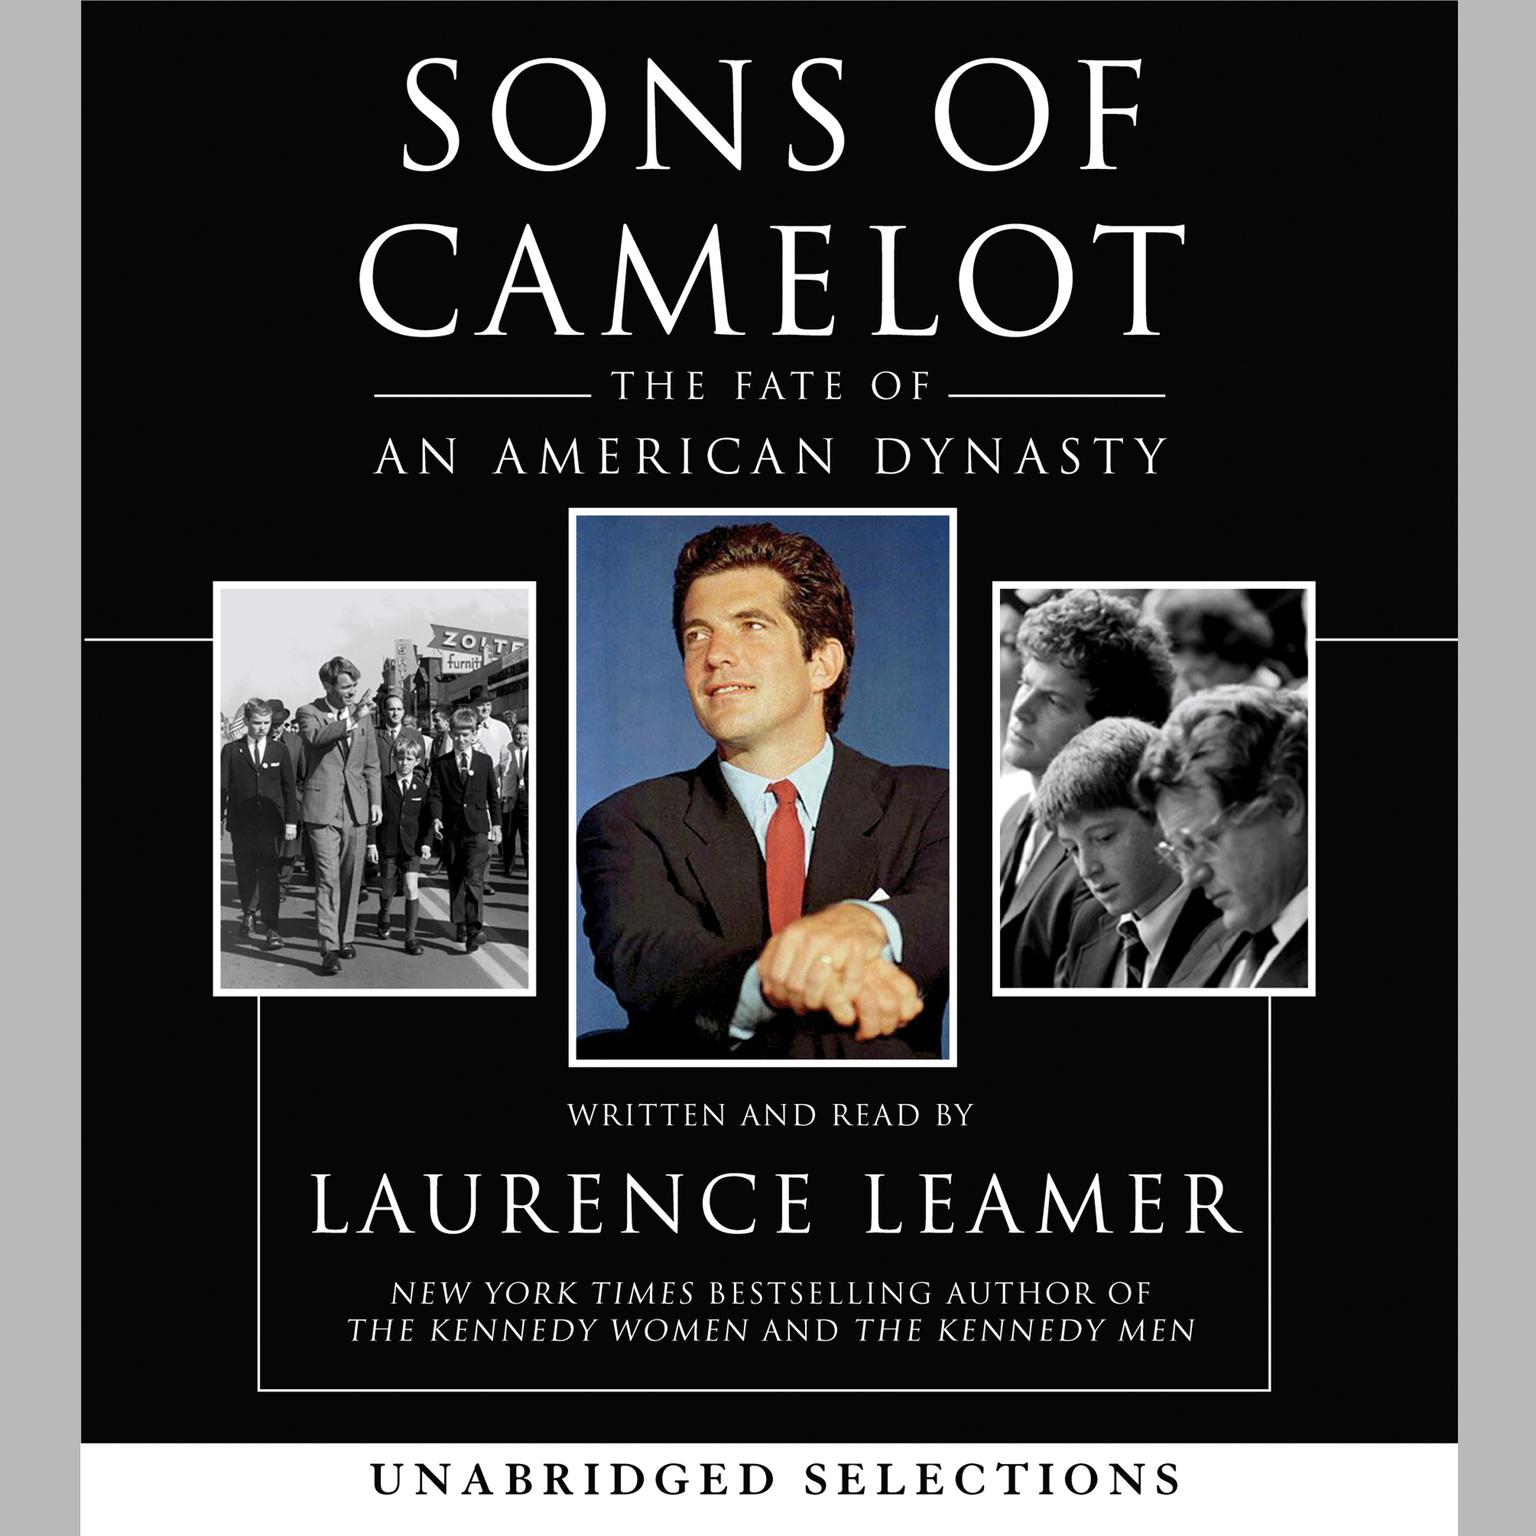 Sons of Camelot (Abridged): The Fate of an American Dynasty Audiobook, by Laurence Leamer